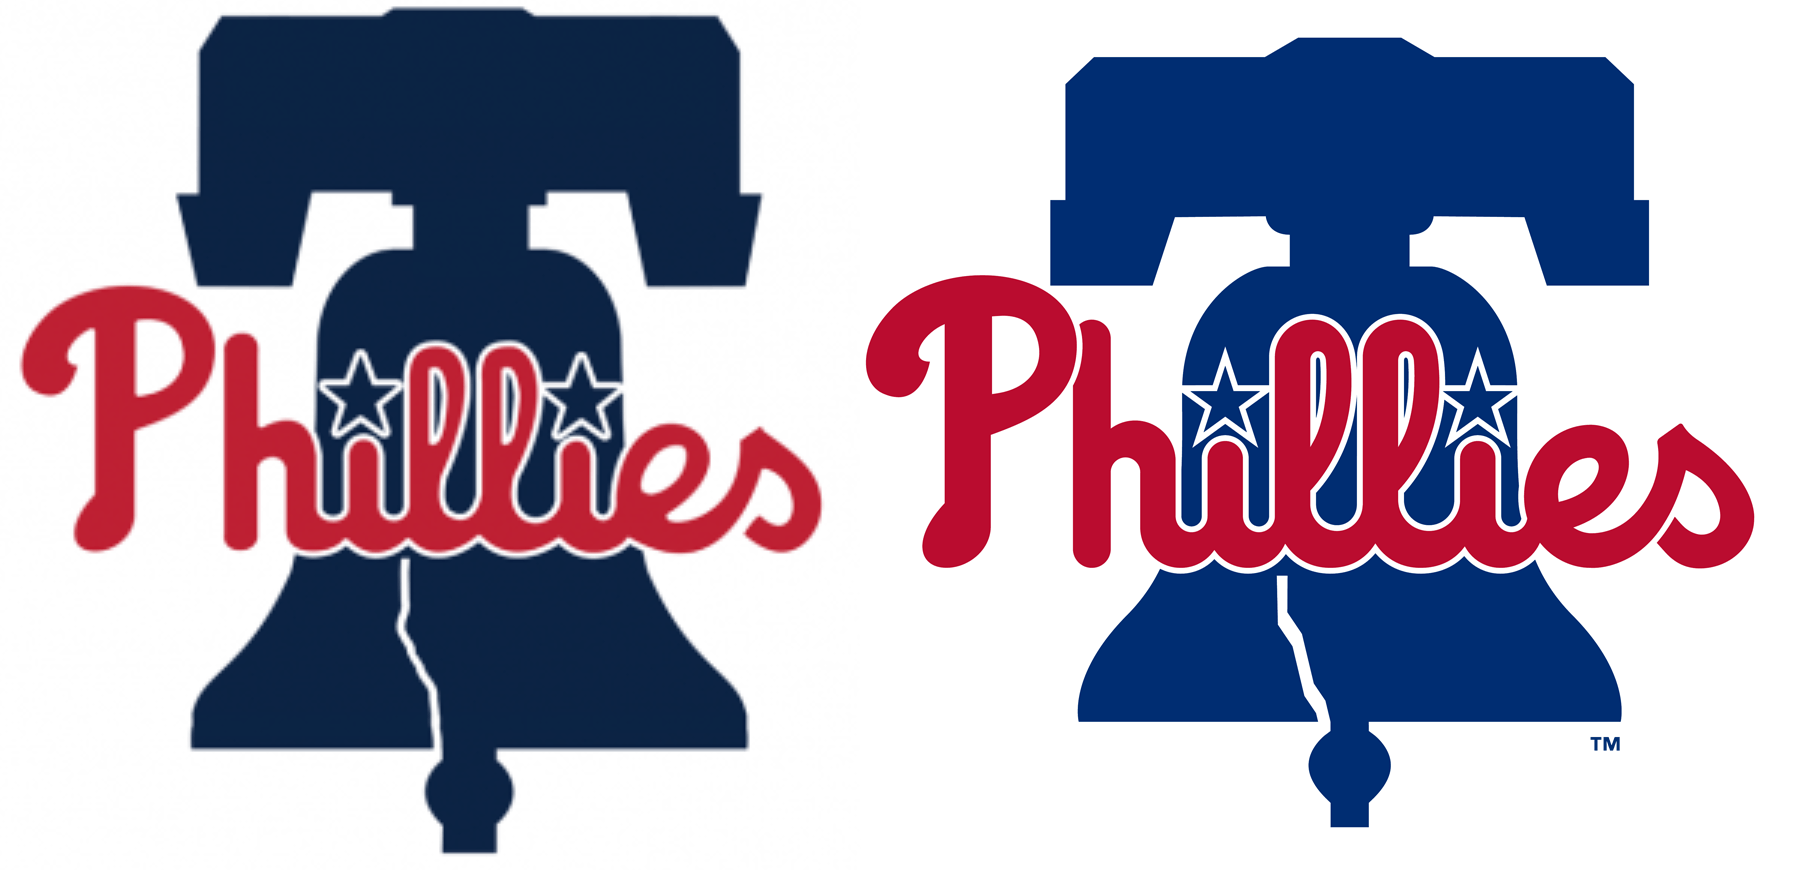 Philies Logo - Better image of the new Phillies logo